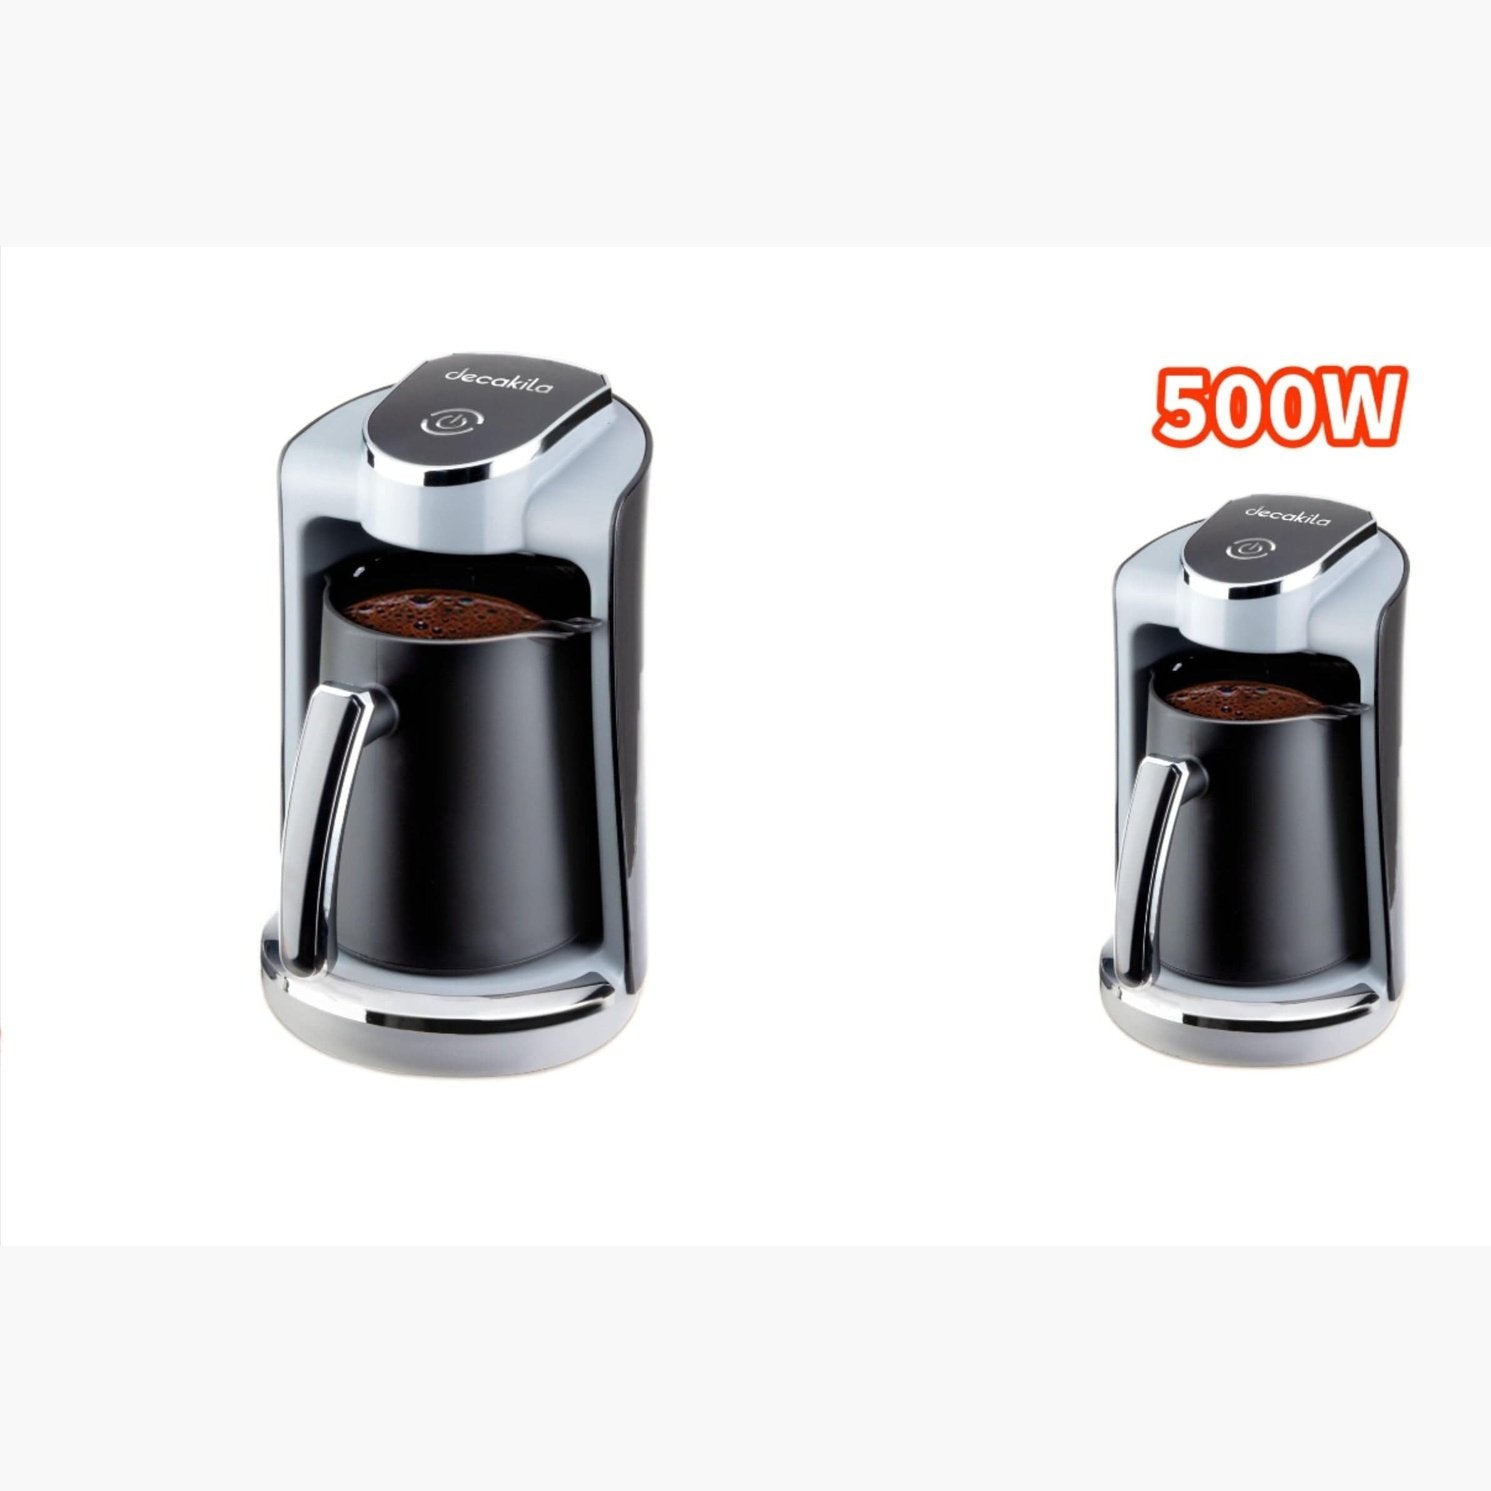 Buy Decakila Coffee Grinder 150W - KECF006B in Ghana | Supply Master Kitchen Appliances Buy Tools hardware Building materials